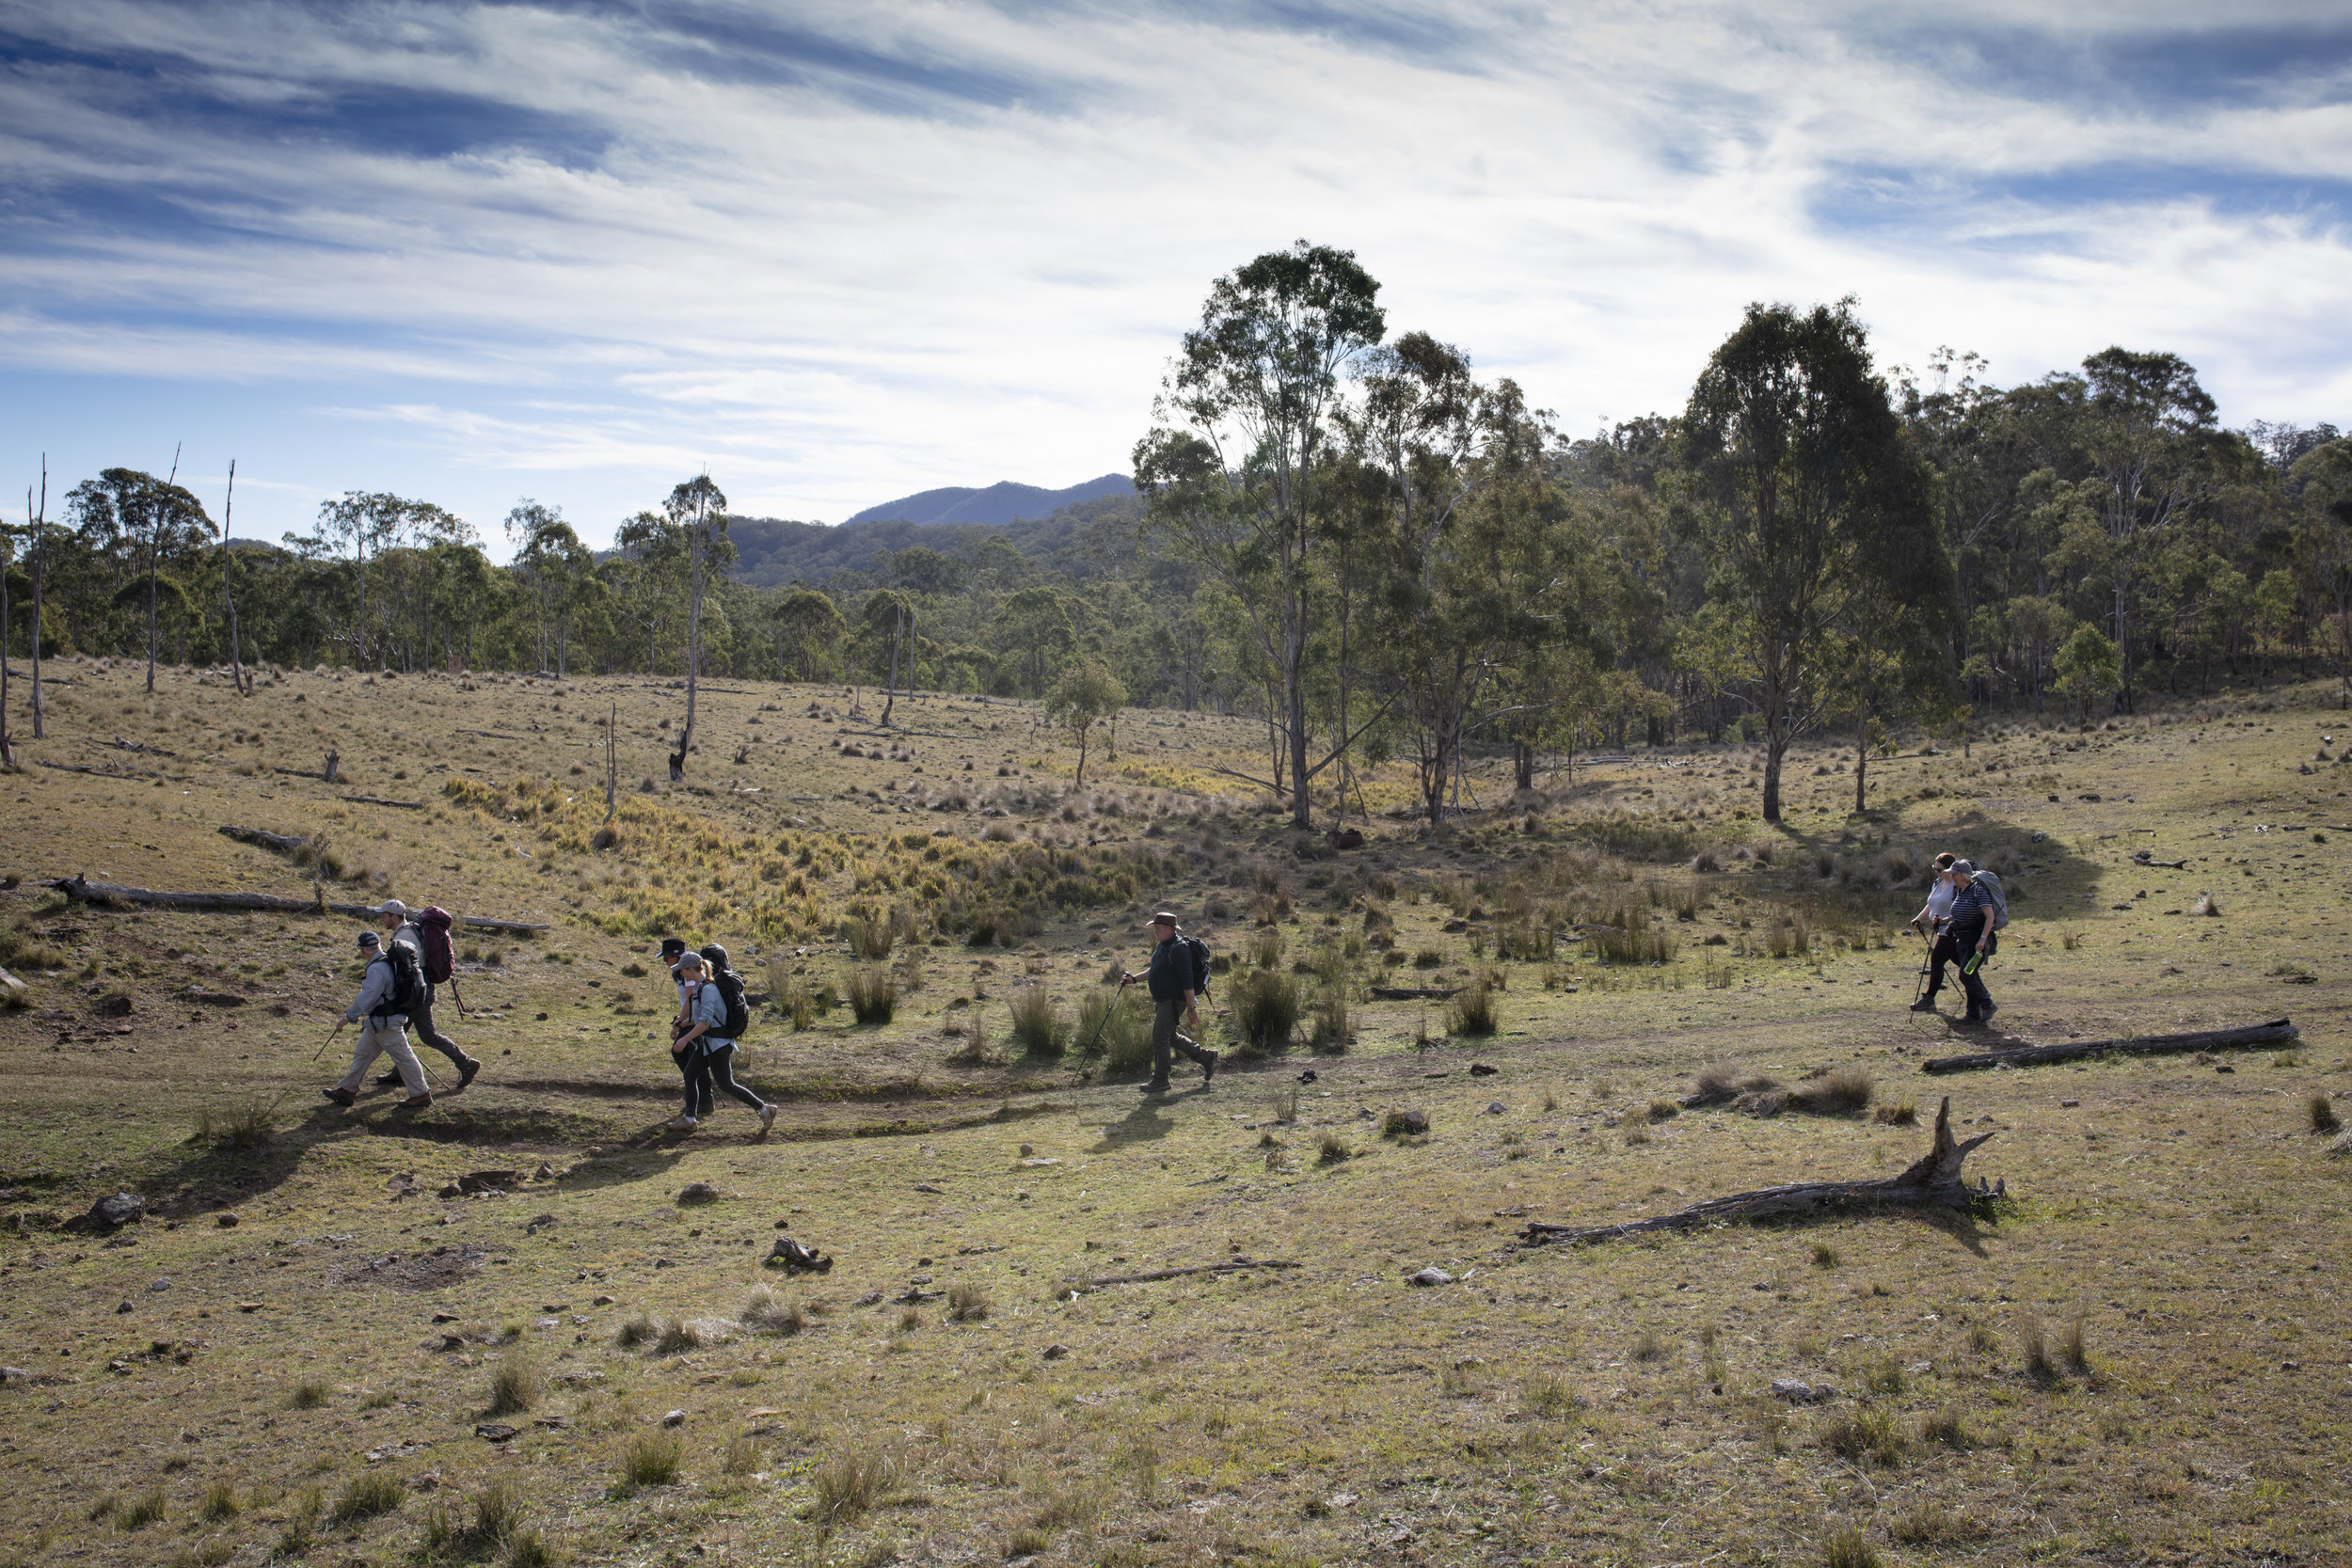  Qantas Magazine/Scenic Rim Walk.
The walk on Spicers Station Land.

Photography : Russell Shakespeare 